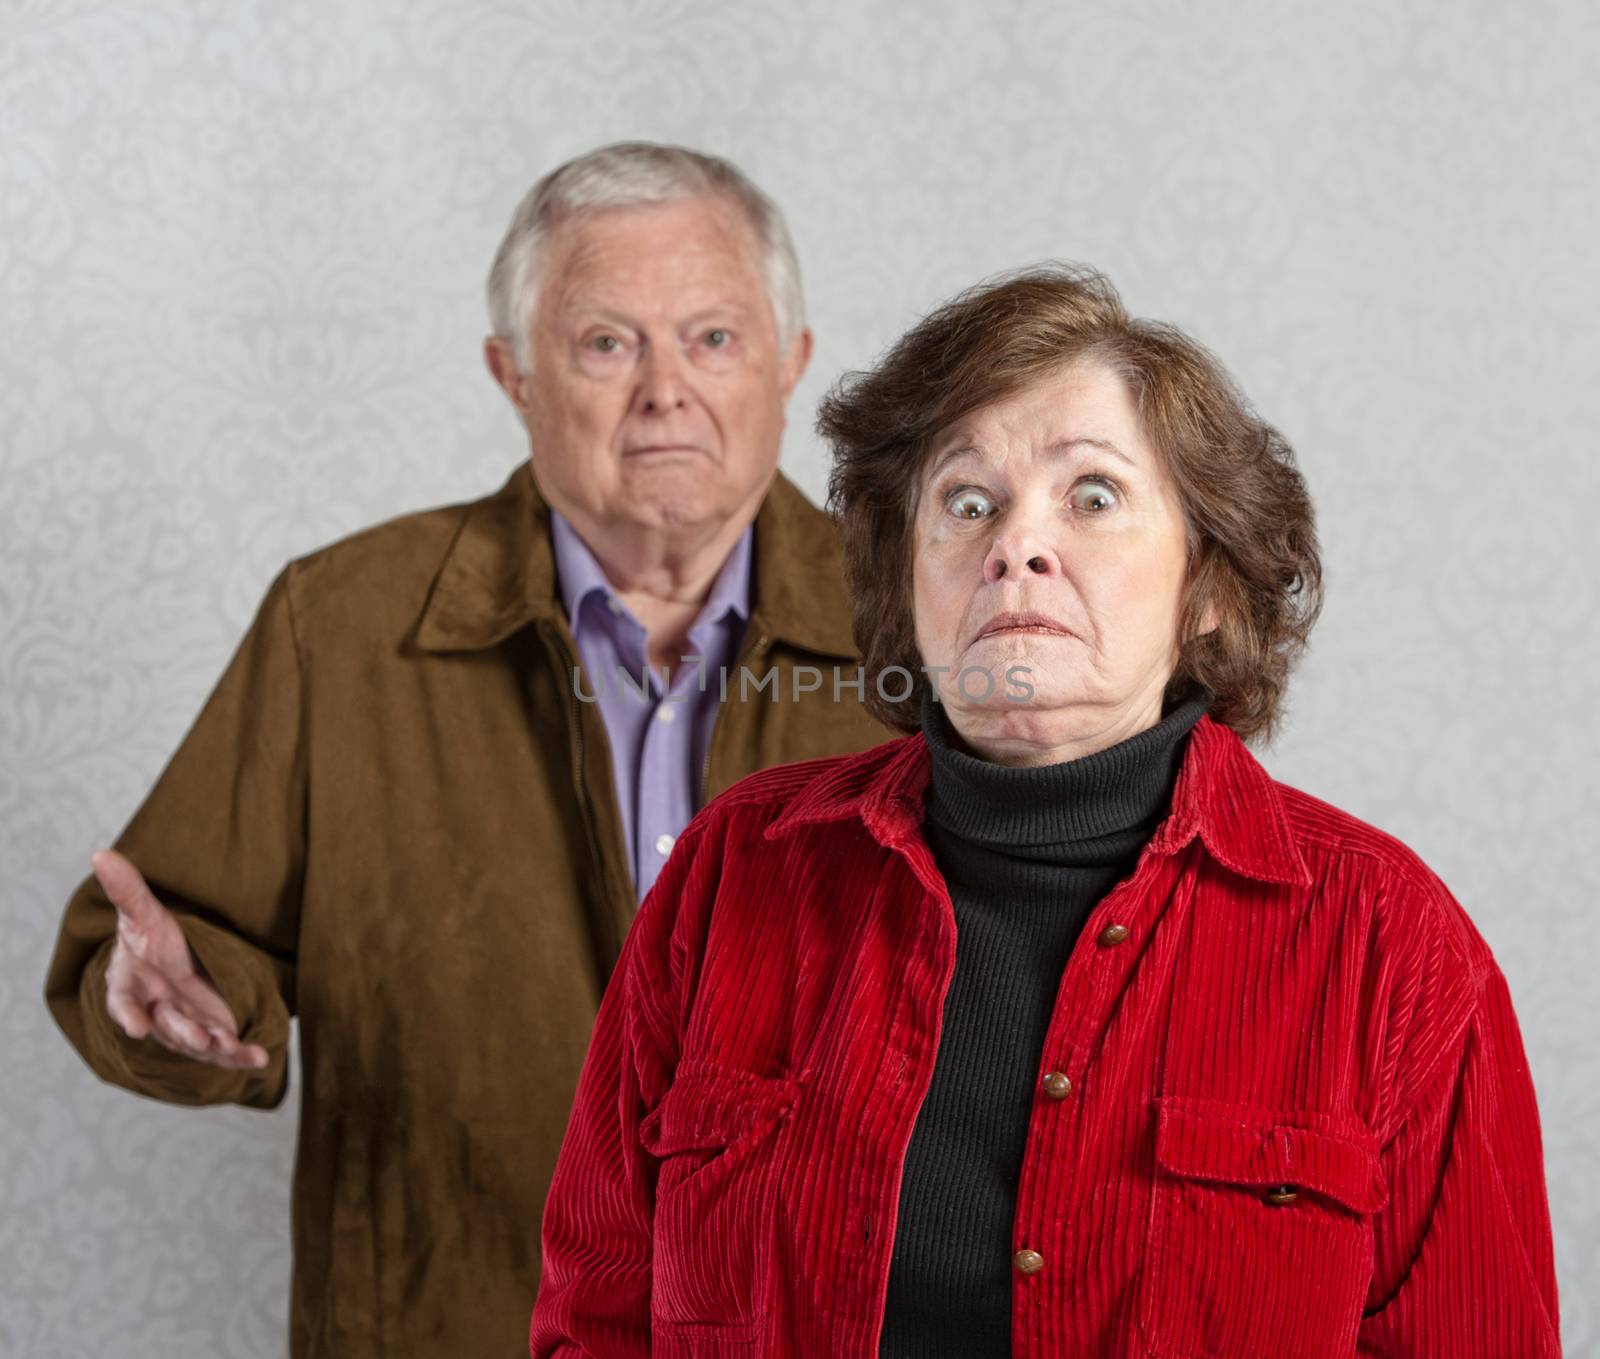 Stiff older woman in front of confused man